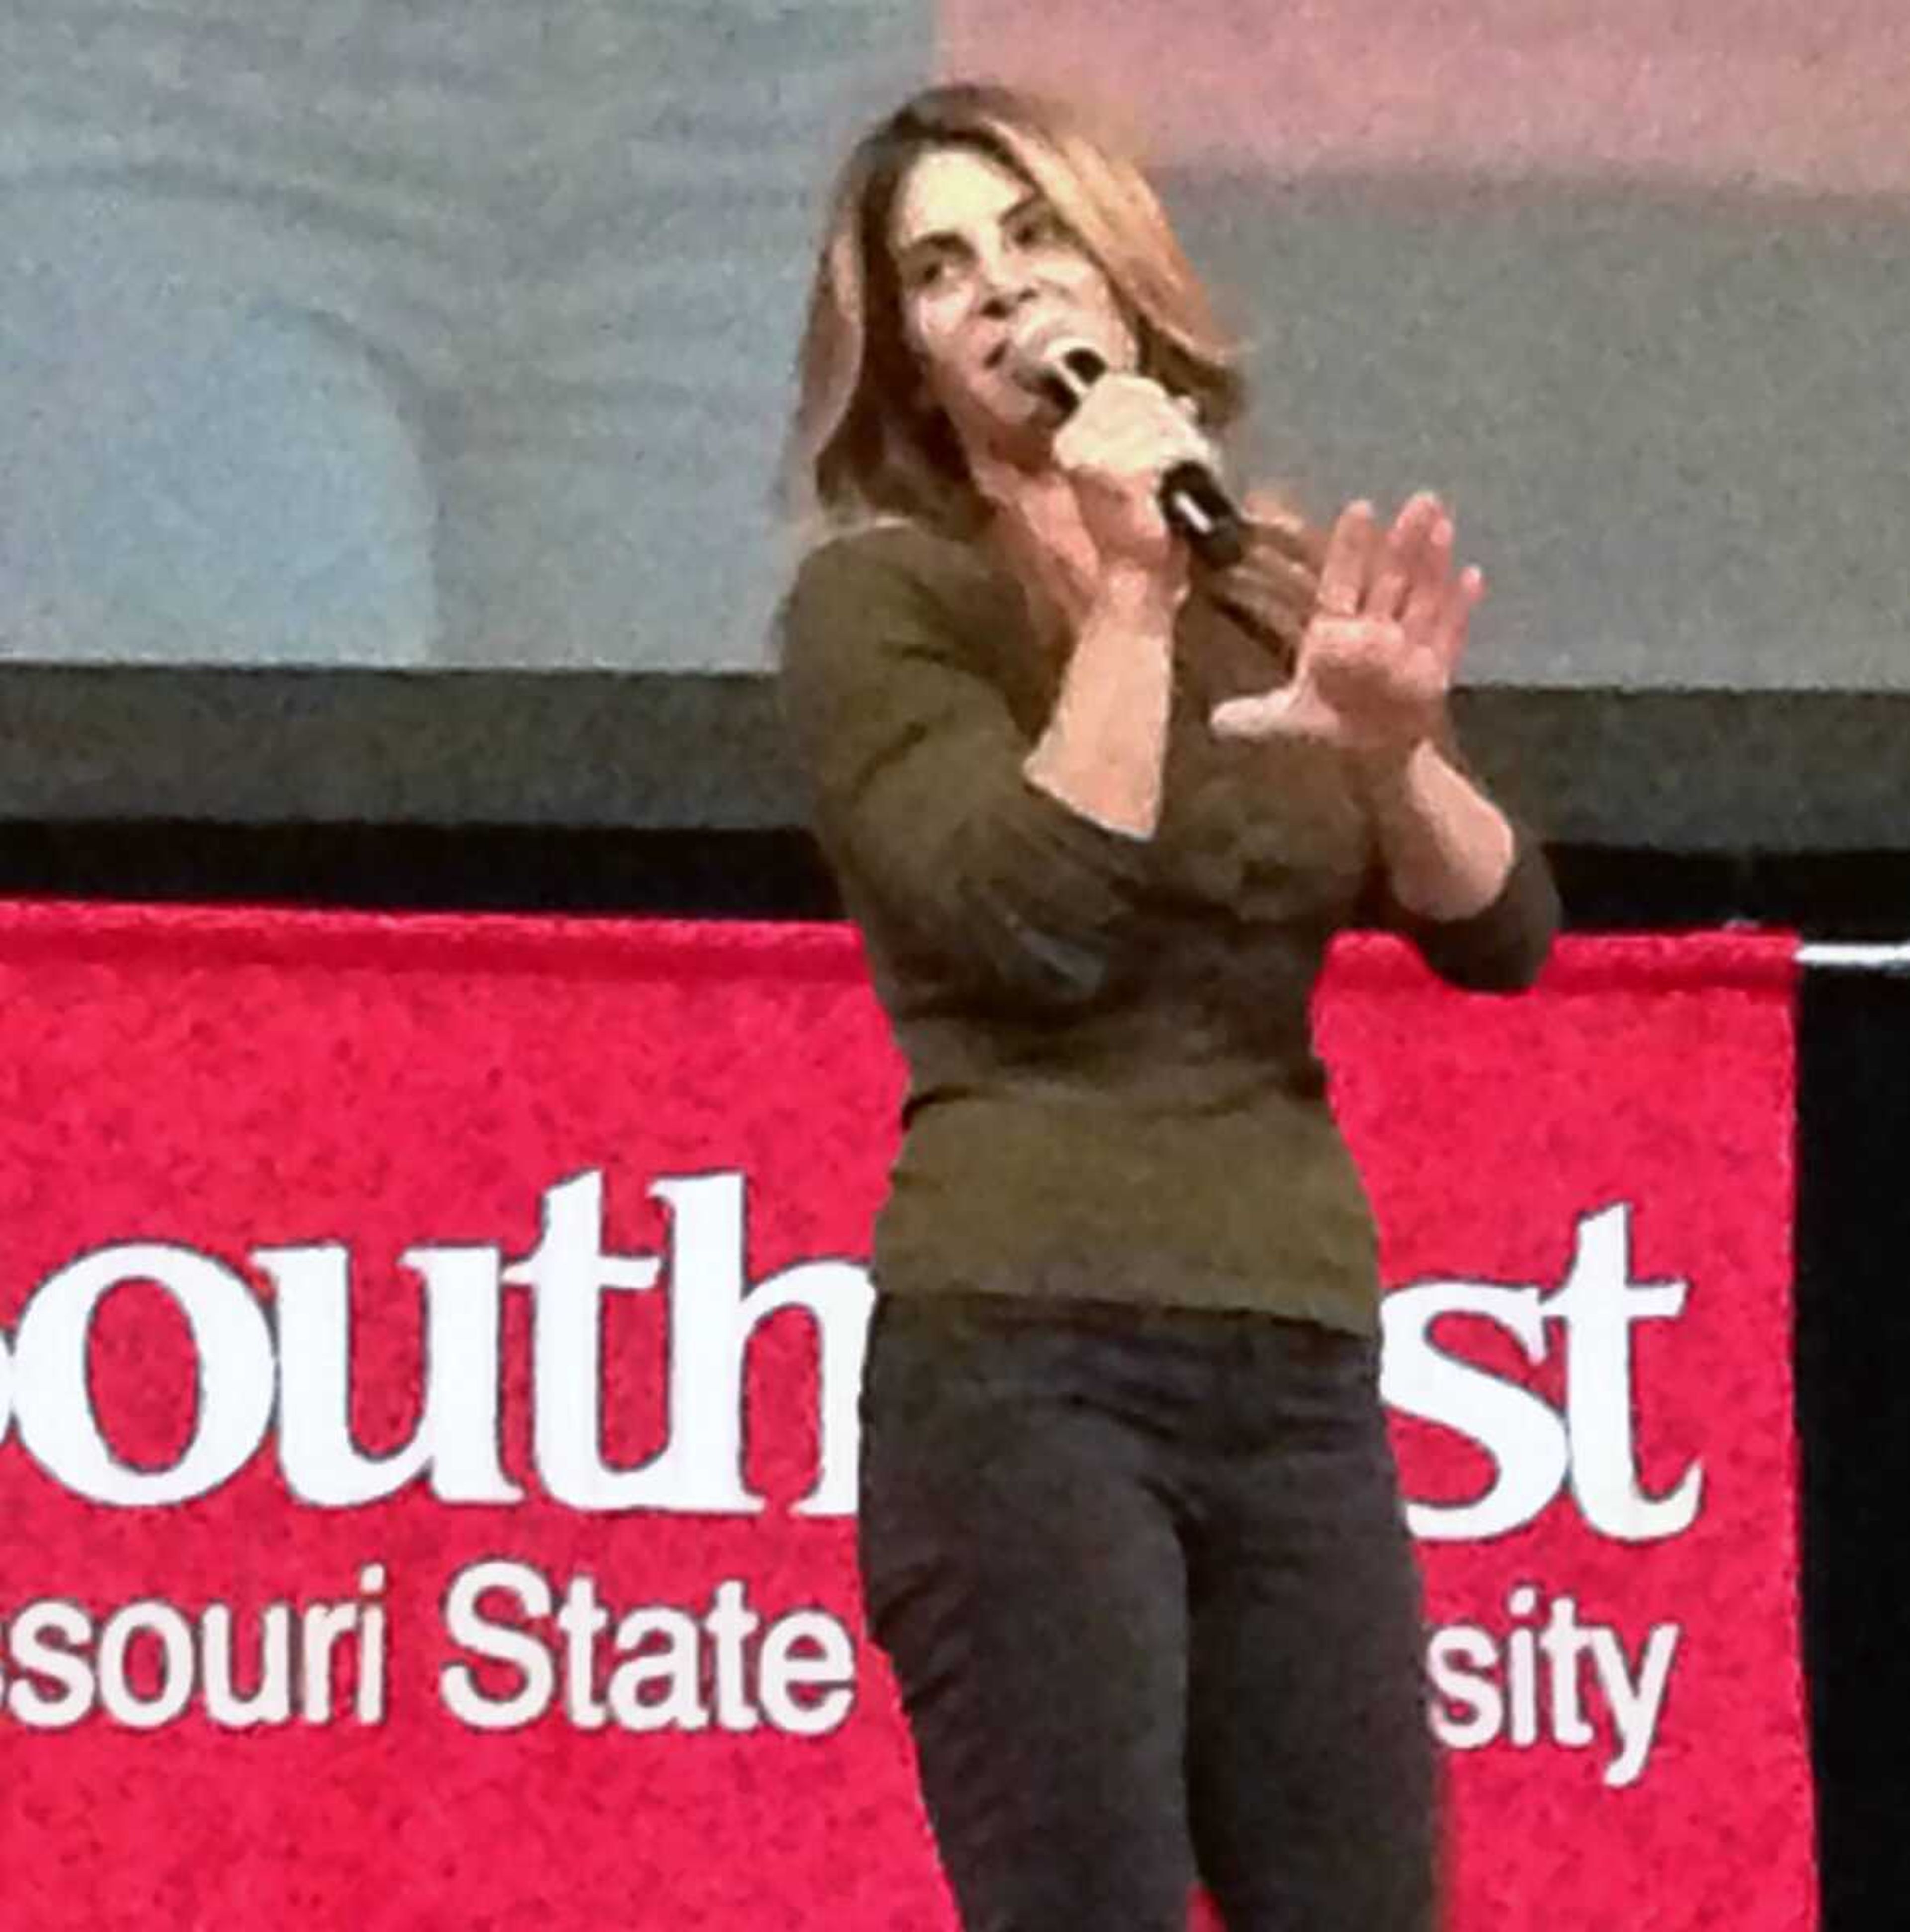 Fitness icon Jillian Michaels spoke to more than 1,600 people at the Show Me Center